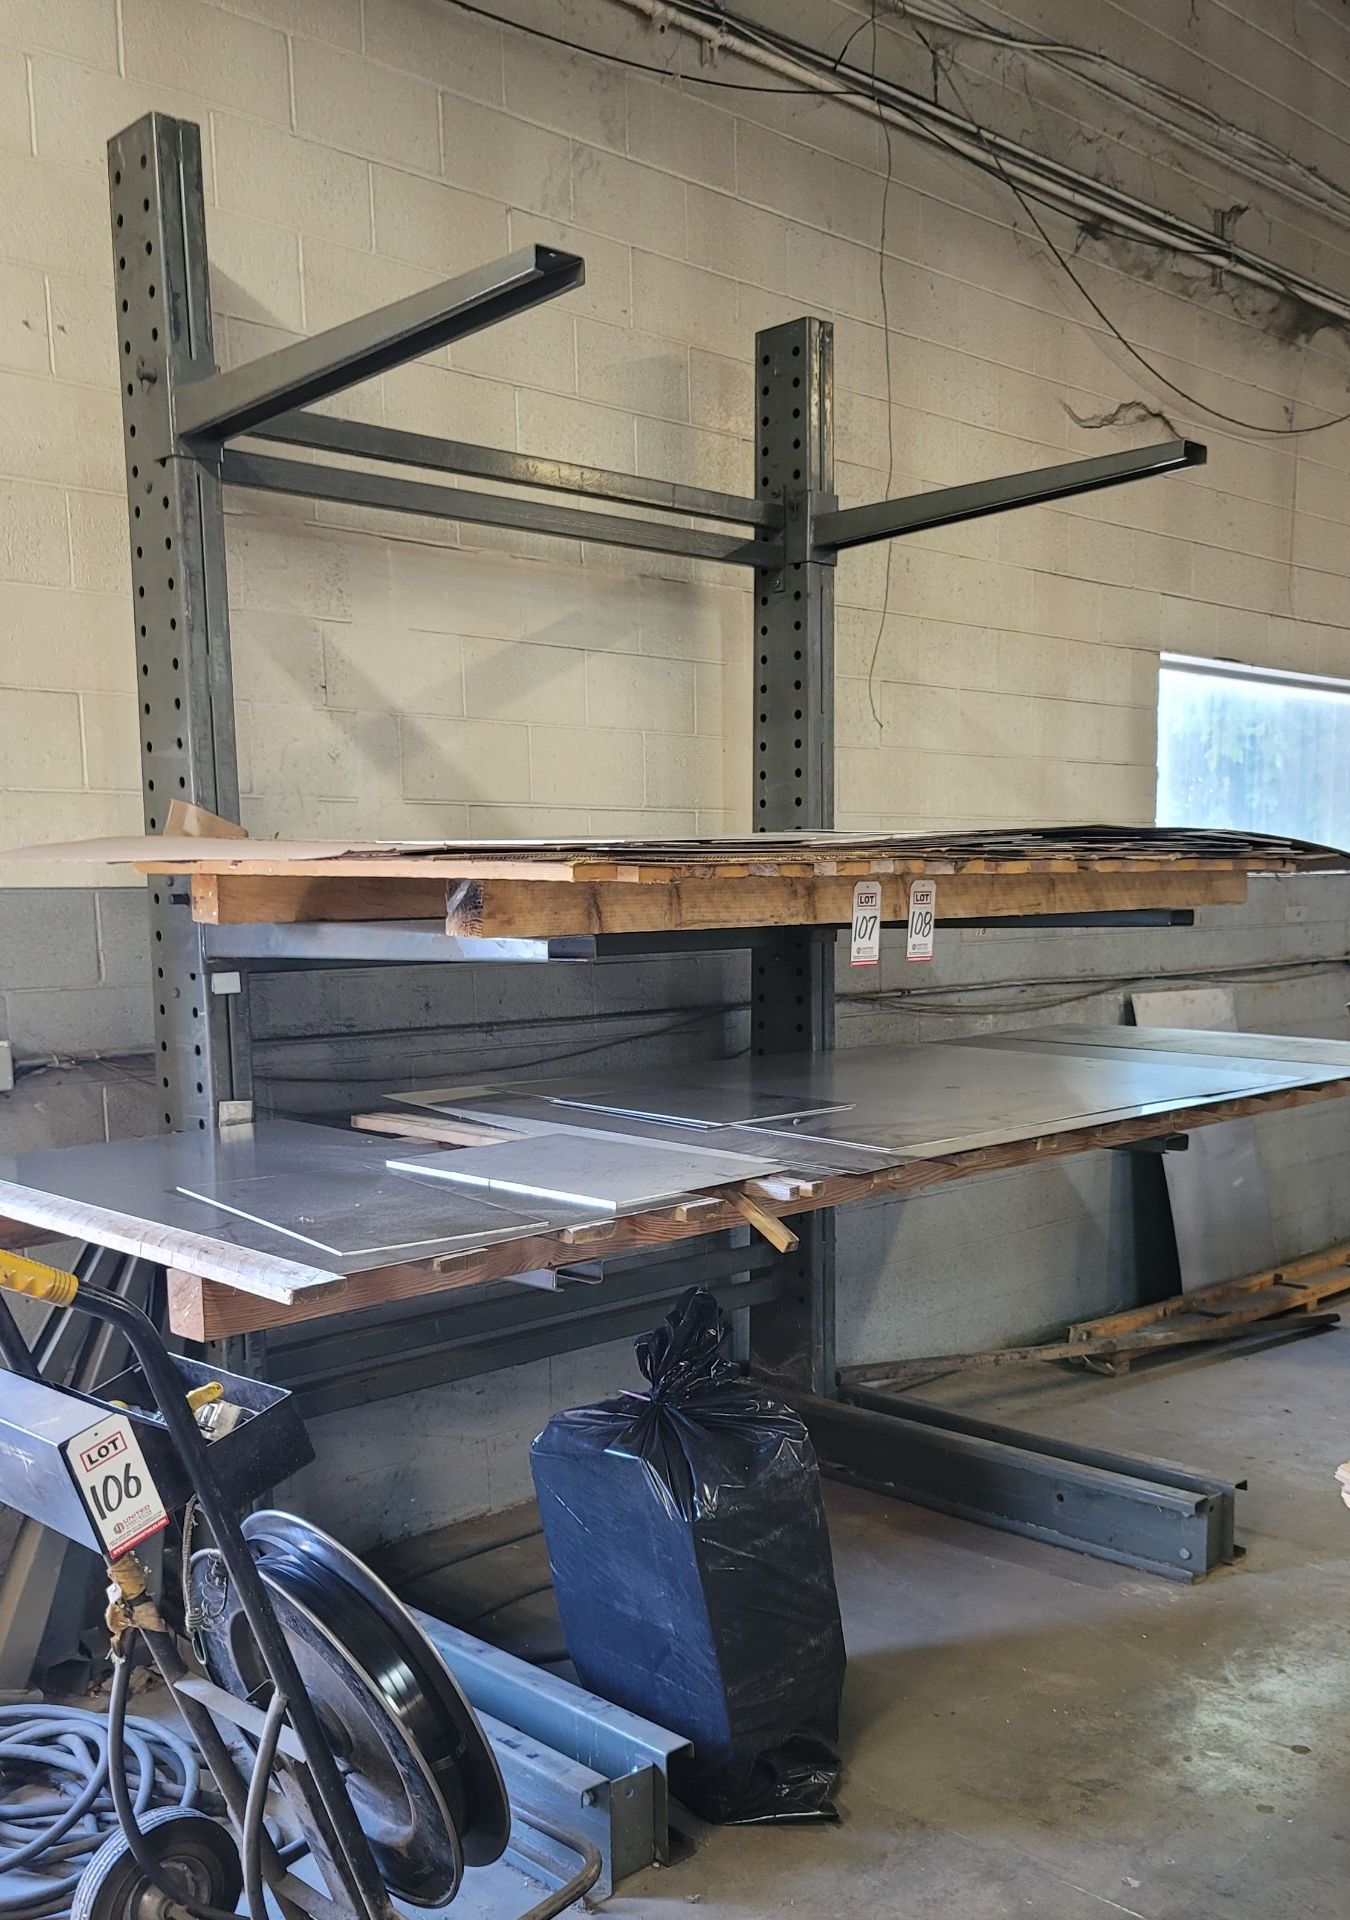 CANTILEVER MATERIAL RACK, 7' X 61" X 10' HT, 42" ARMS, CONTENTS NOT INCLUDED, (LOCATION: 2174 W 2300